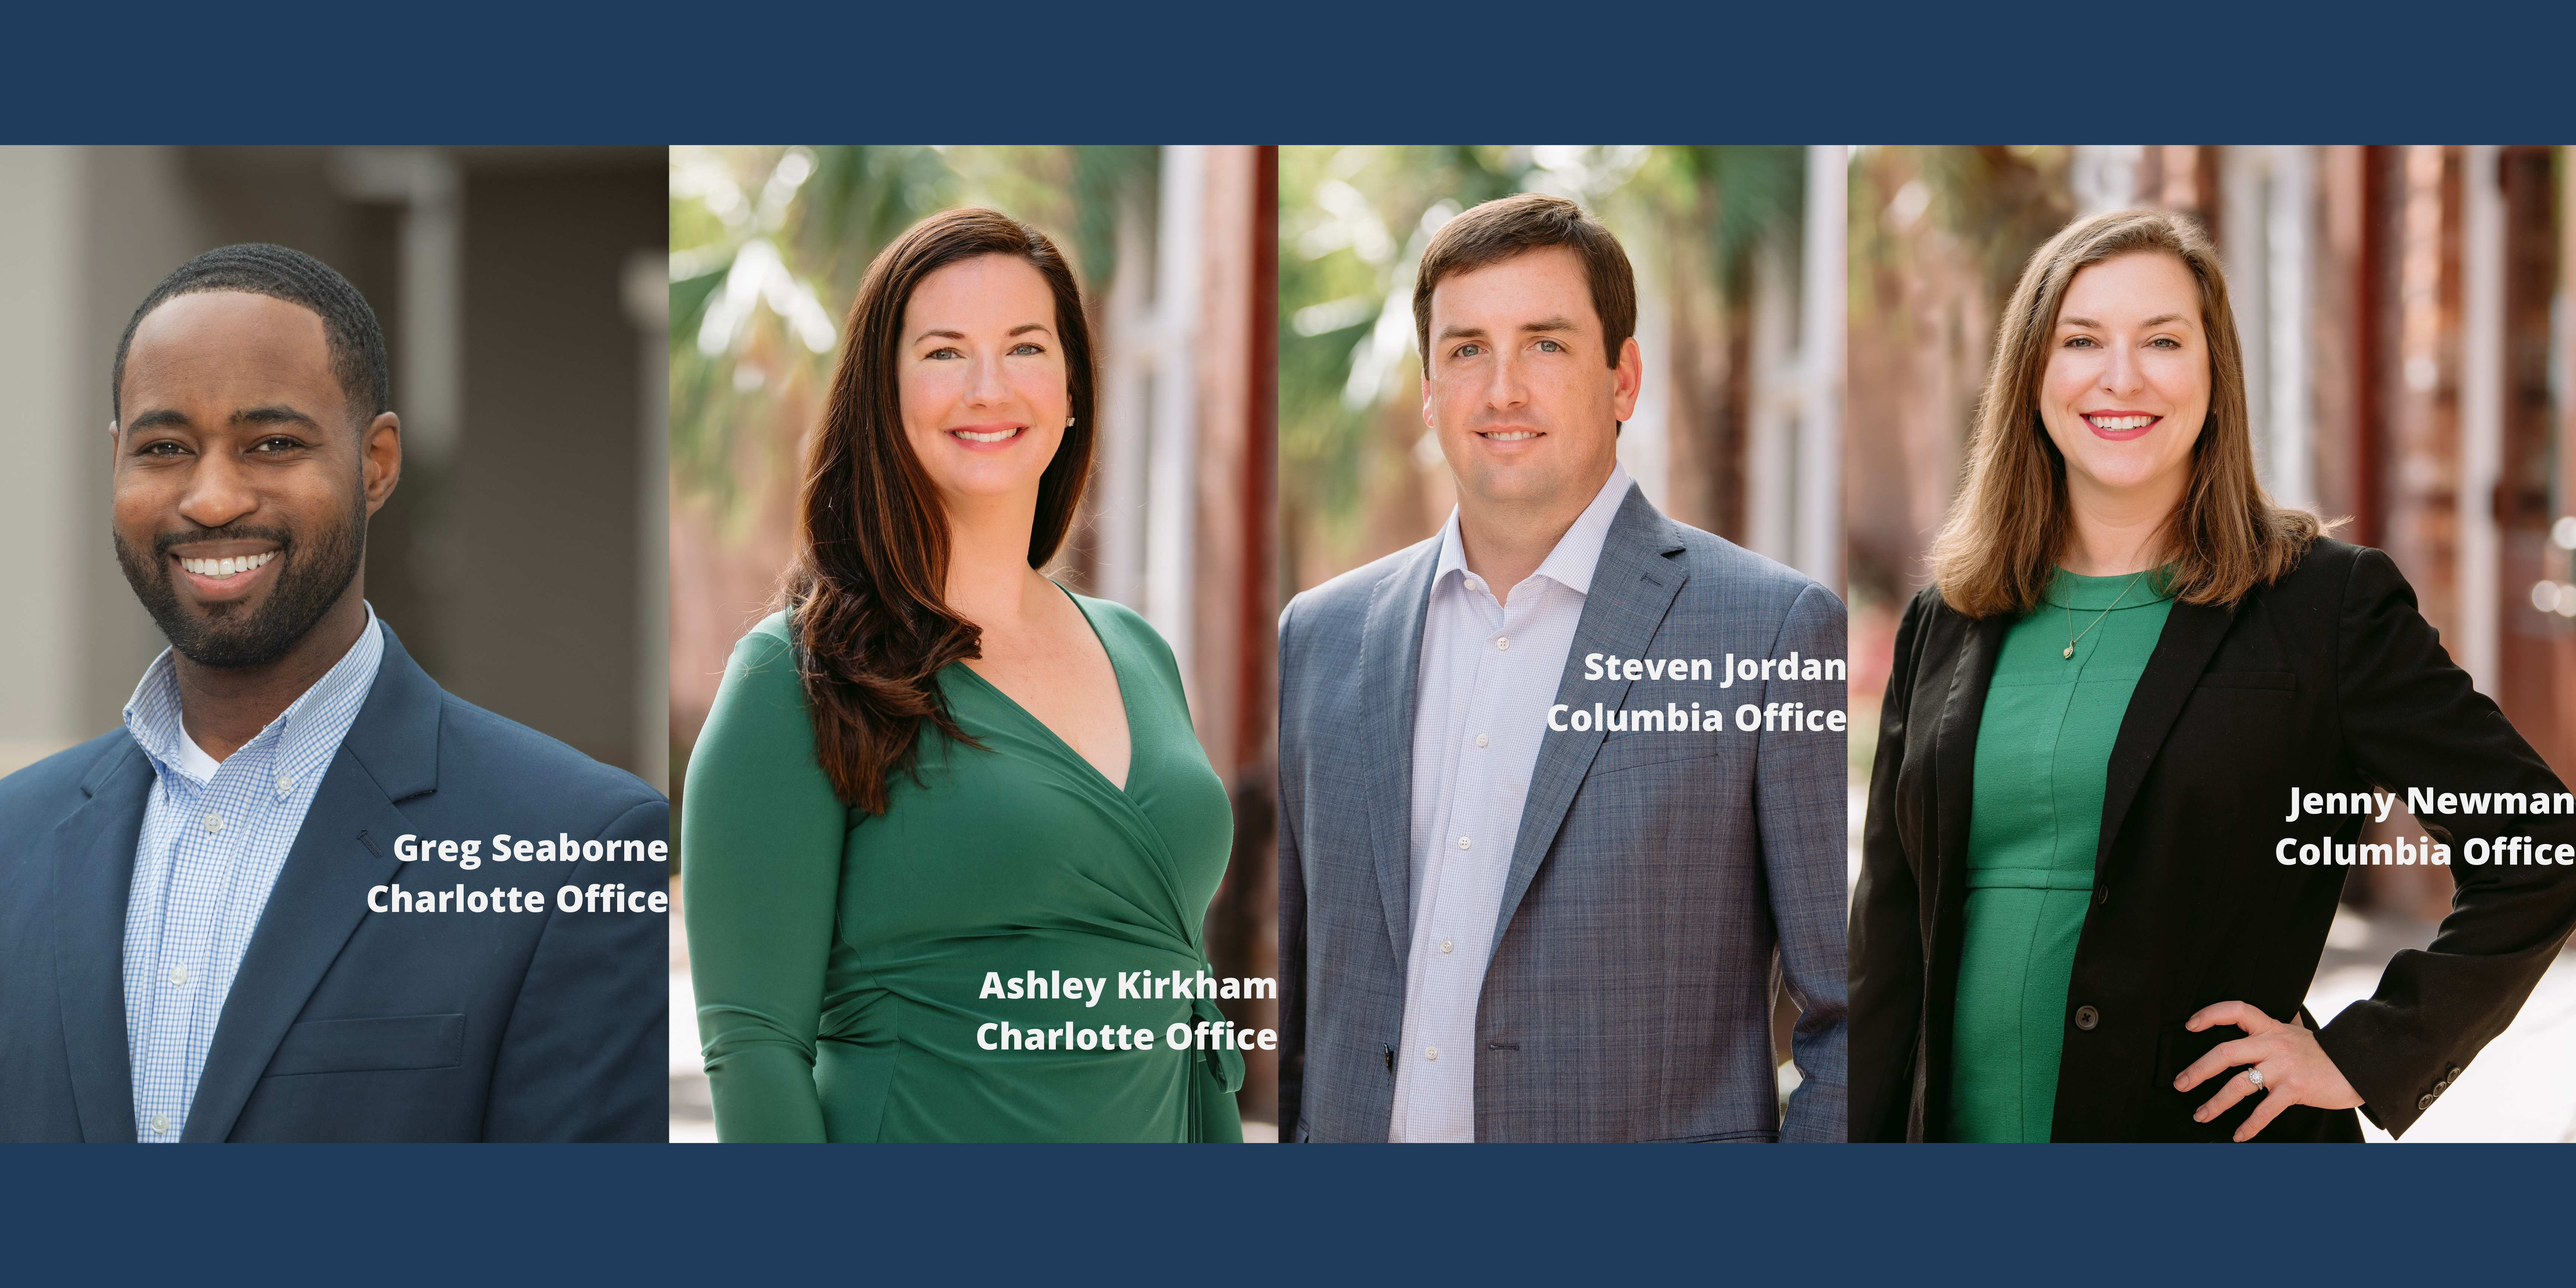 wjcb welcomes Greg Seaborne, Ashley Kirkham, Steven Jordan, and Jenny Newman to workers’ compensation defense practice in the Charlotte and Columbia offices